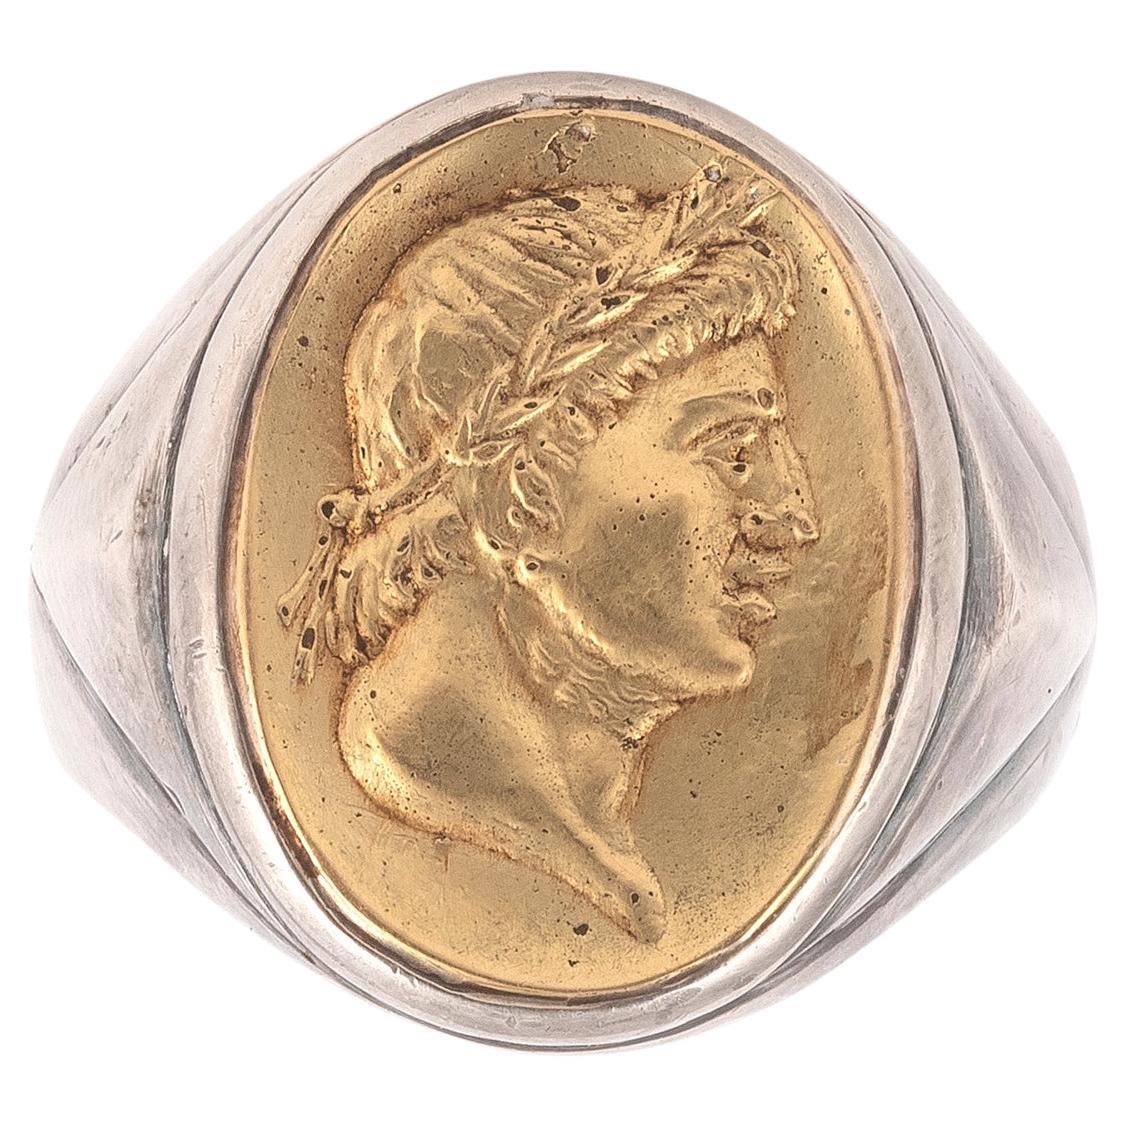 Depicting a roman emperor Gaius Julius Caesar, 18kt yellow gold and silver.
Top size 21mm x 18mm
Ring size 10 
Gross weight: 21gr.